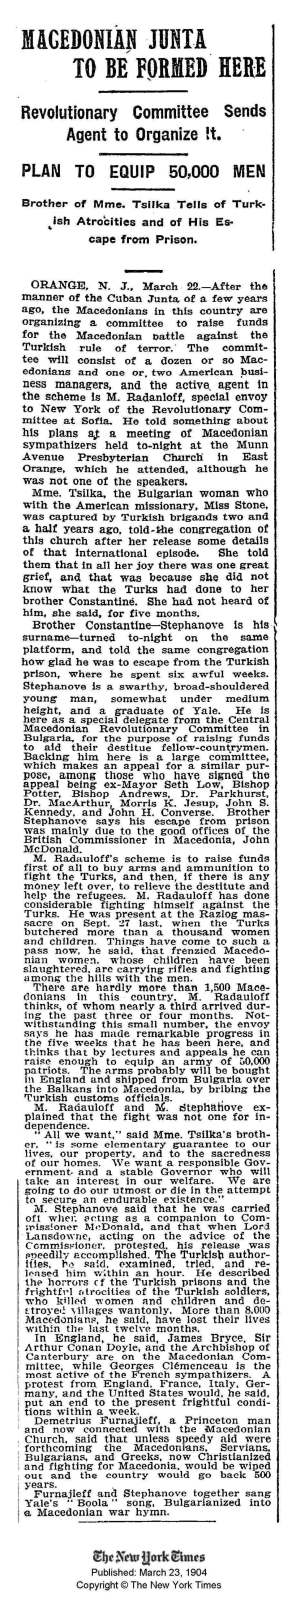 1904.03.23_The New York Times - Macedonian junta to be formed here